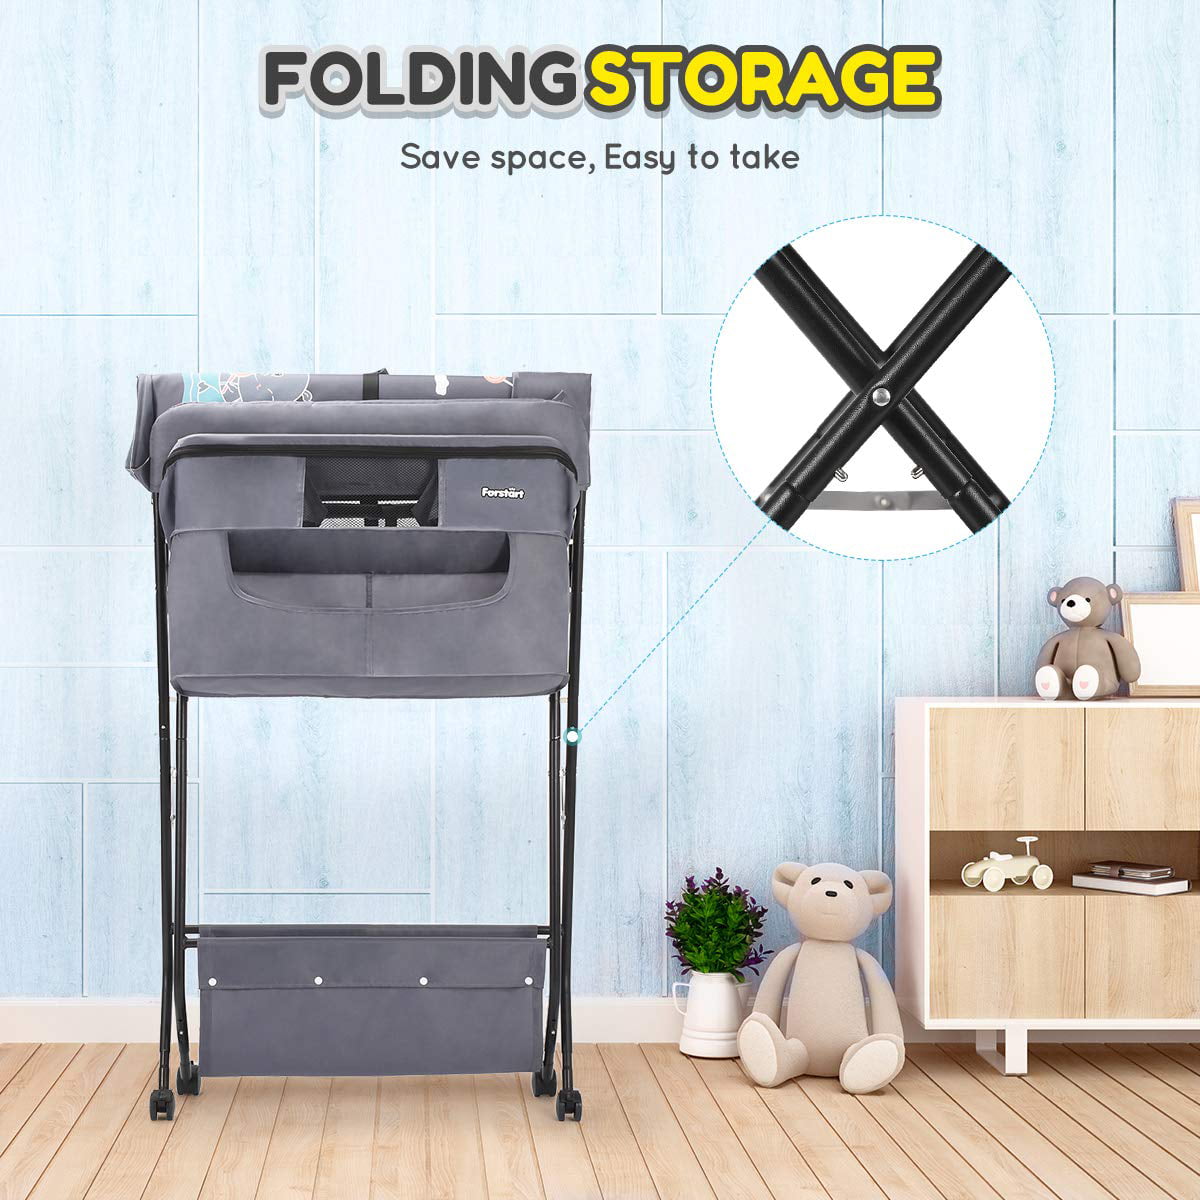 Safety Belt & Storage Racks for Newborn Baby Infant Black Height Adjustable Mobile Nursery Organizer with Hanging Toy KIKET Baby Changing Tables Portable Folding Diaper Changing Station with Wheels 